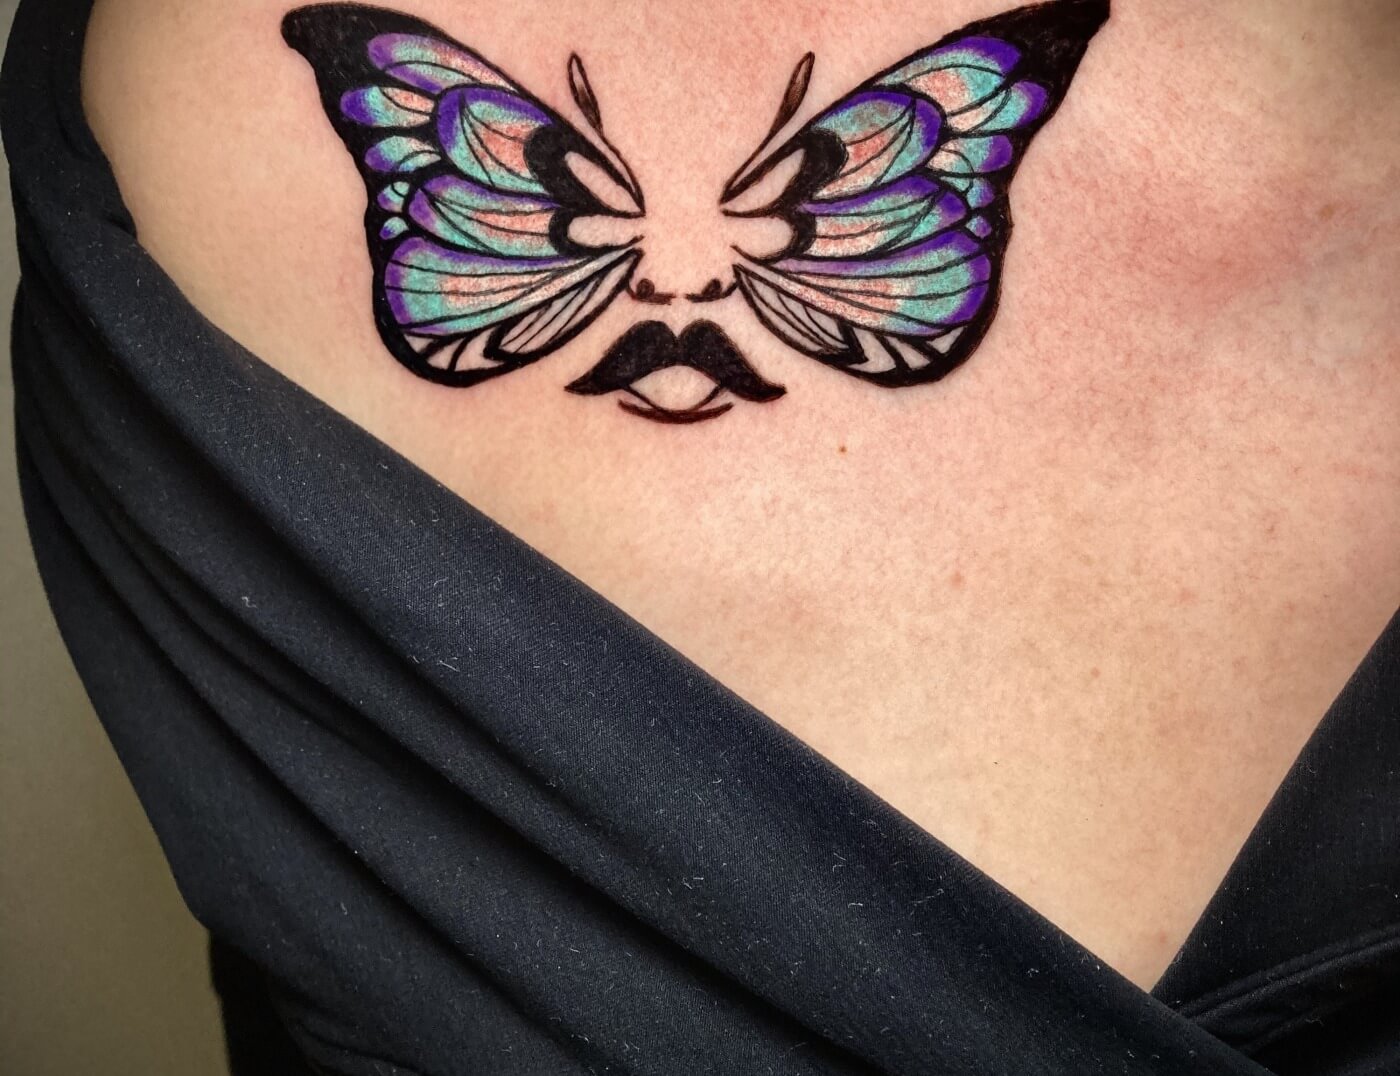 Colorful Butterfly Tattoo By Funk Tha World At Iron Palm Tattoos In Atlanta Georgia. Call 404-973-7828 or stop by for a free consultation with Funk. Walk ins are welcome.